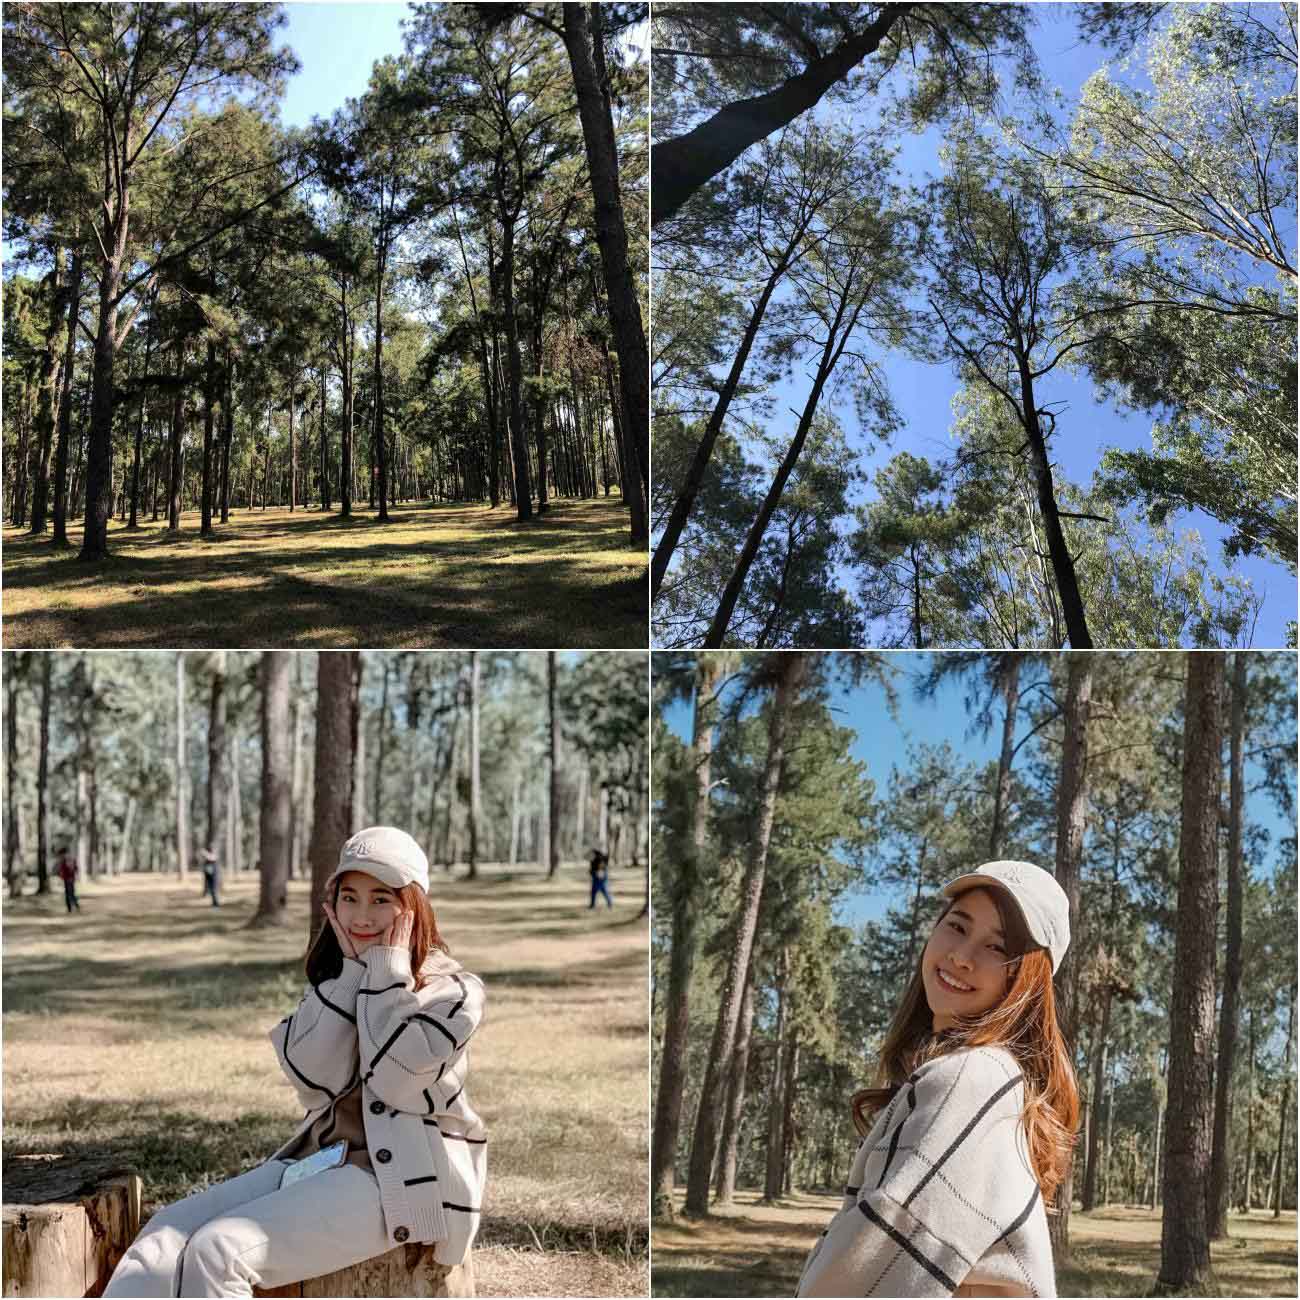 Mae Taeng Pine Garden, great atmosphere, great view for taking pictures. Girls who take photos must not miss the perfect nature, clean, safe, no hassle, cool breeze blowing all day, you definitely won't be disappointed.